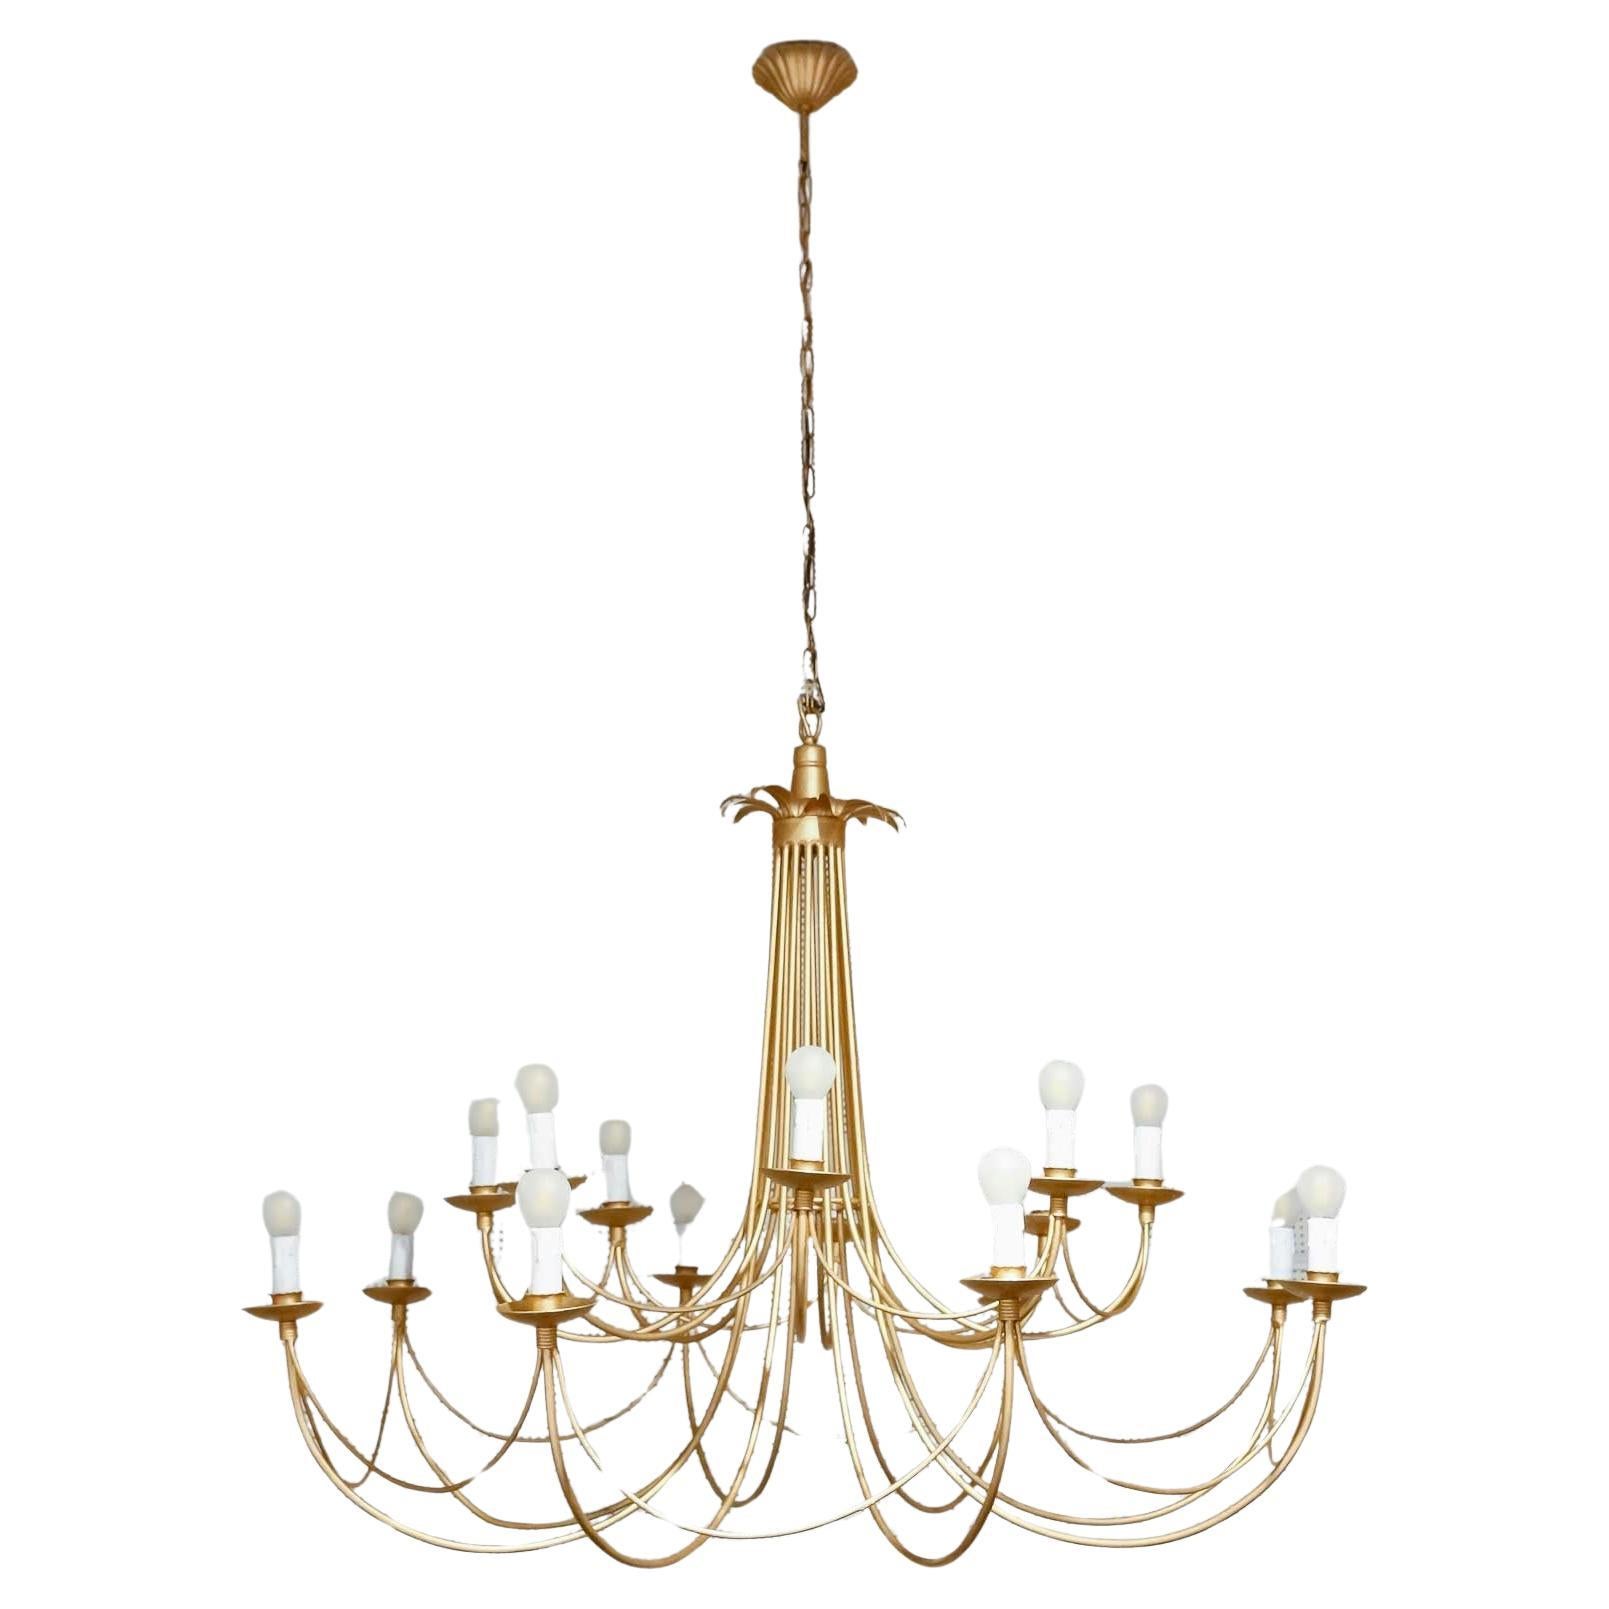 1960 Large 16-light chandelier by Maison Roche